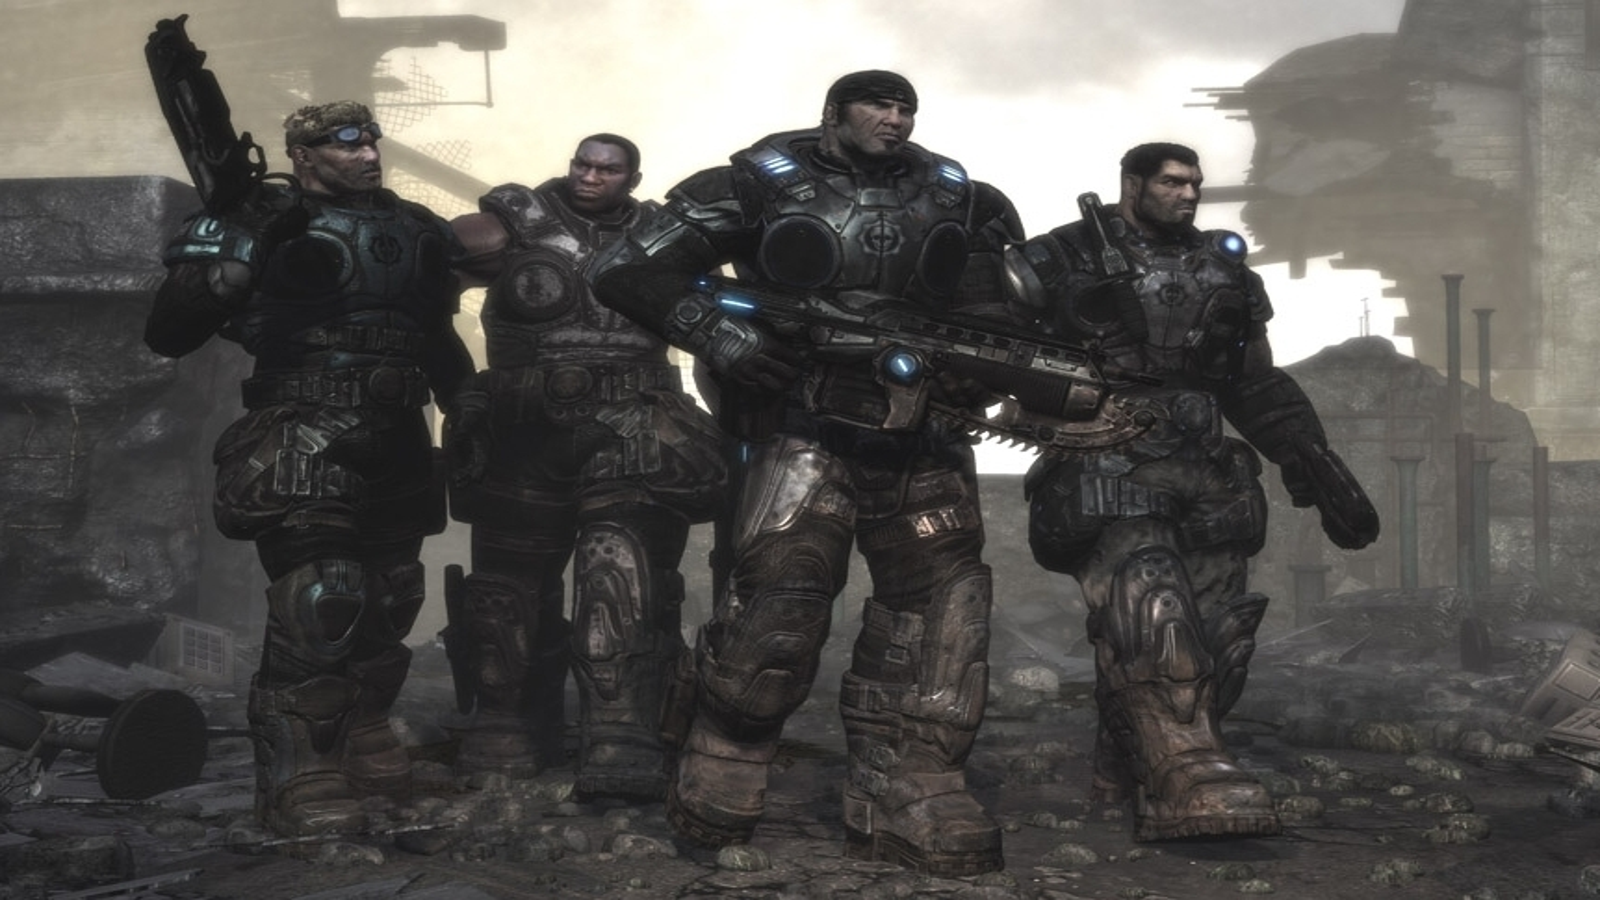 Gears of War 4 opening mission is a history lesson